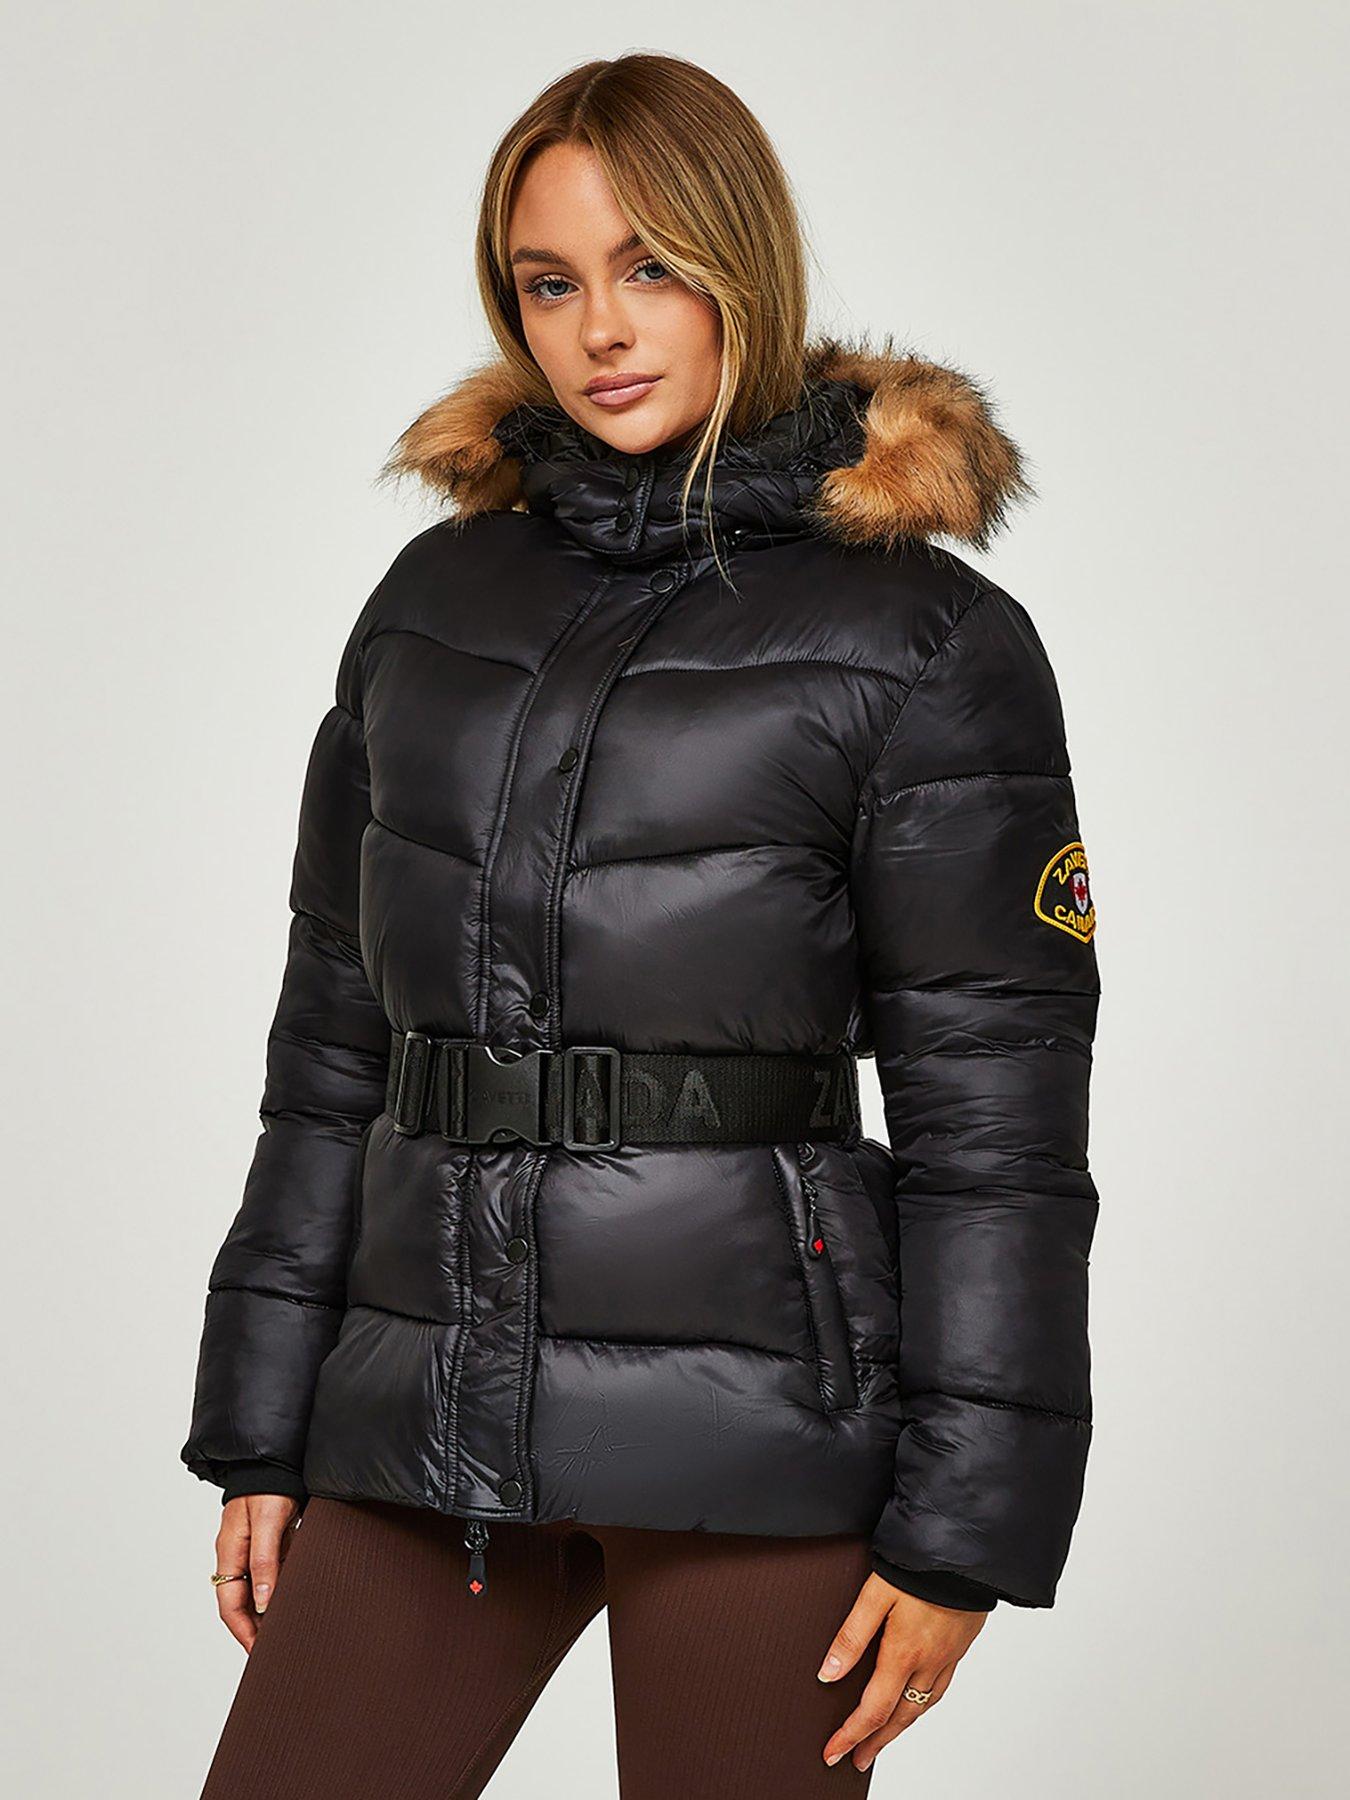 Women's Puffer Jackets, Quilted and Padded Coats